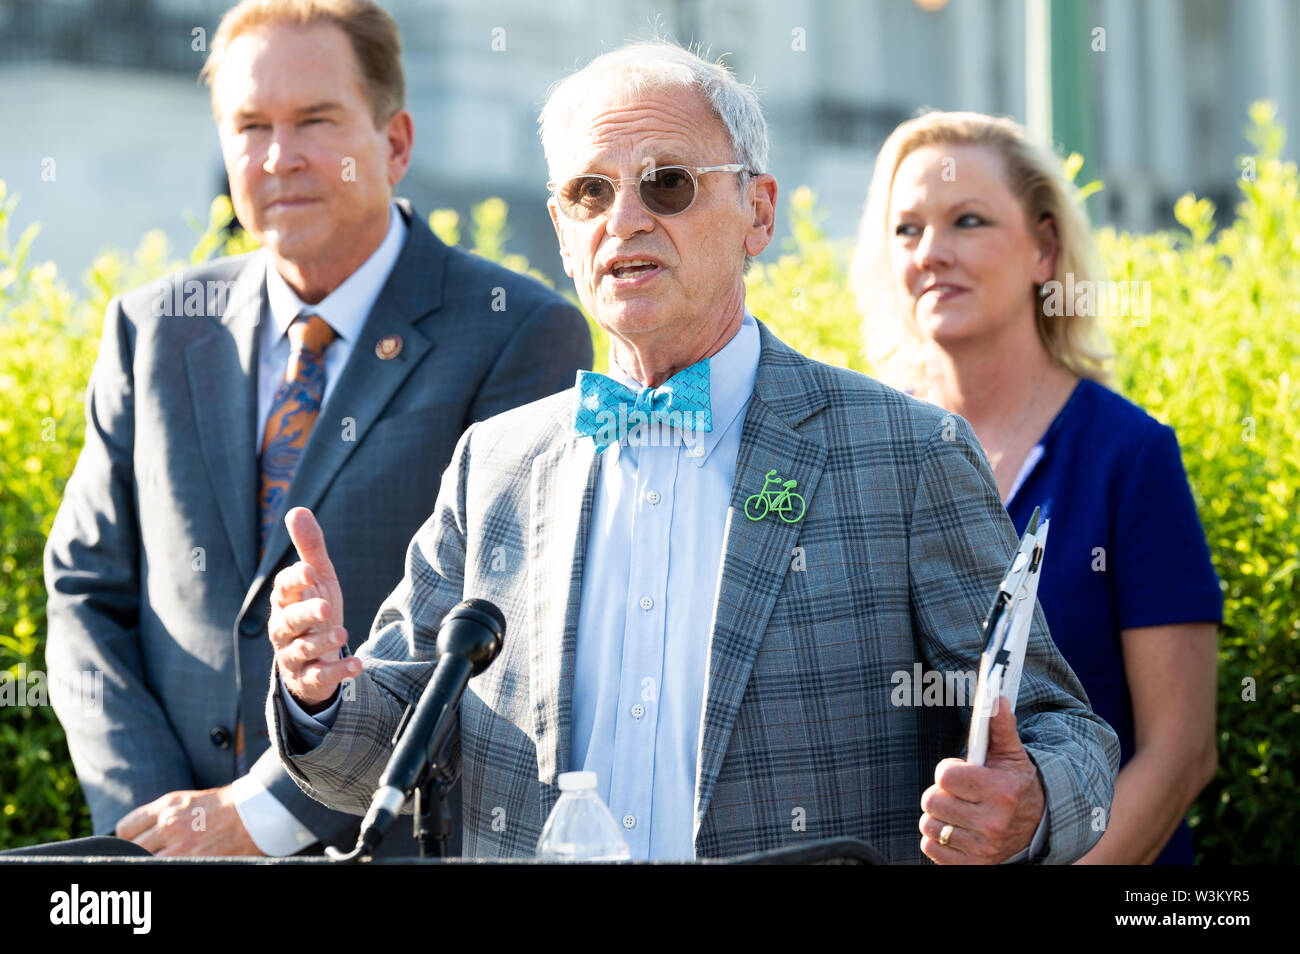 U.S. Representative Earl Blumenauer (D-OR) advocating for the passage of the  “Preventing Animal Cruelty and Torture Act” or the “PACT Act” at the Capitol in Washington, DC. Stock Photo